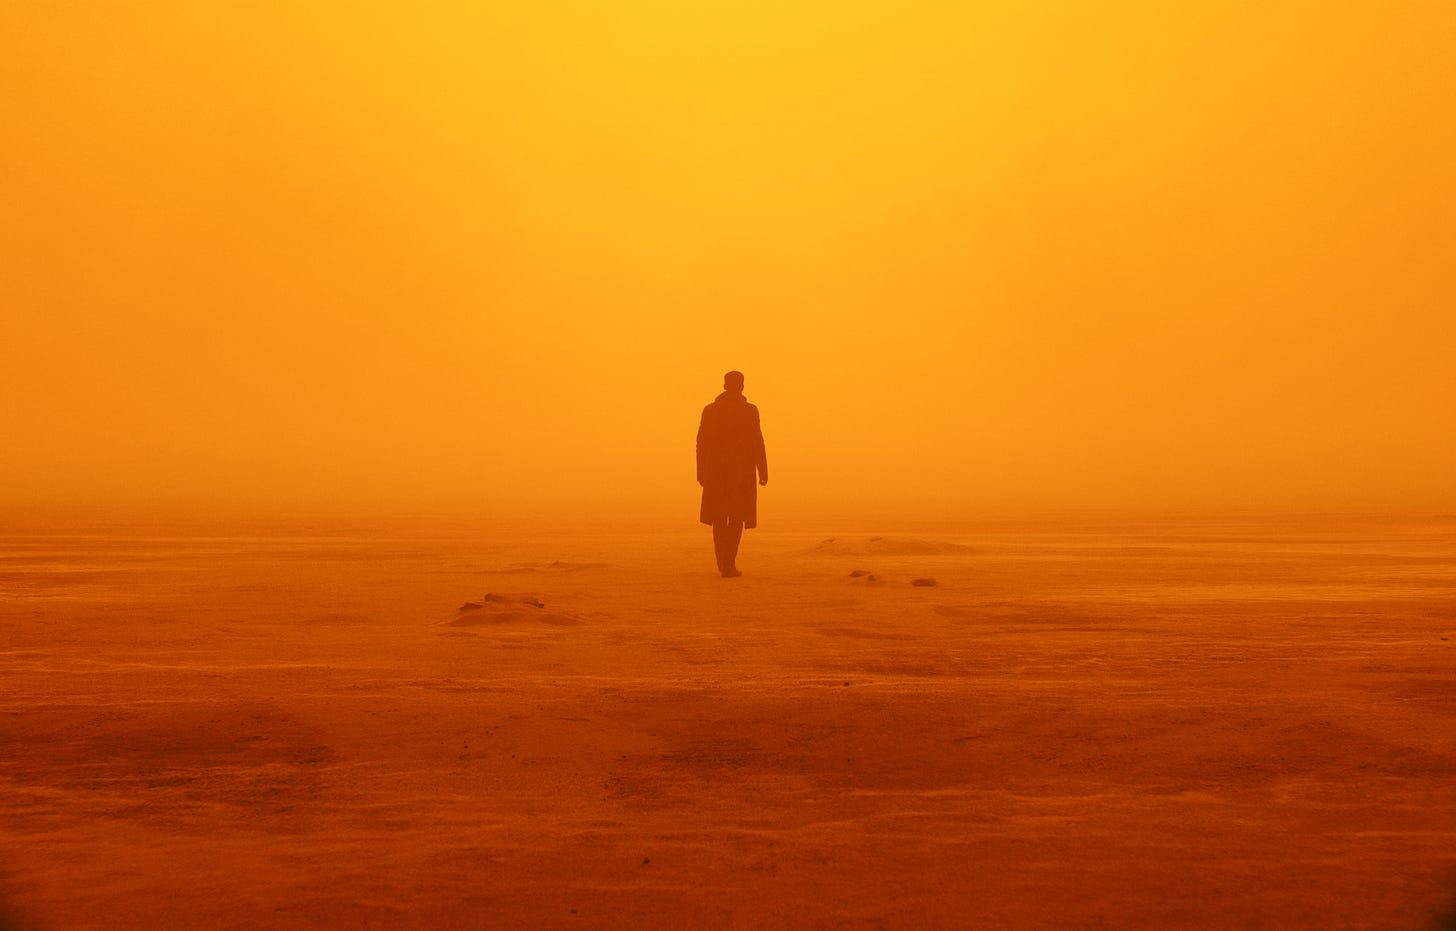 A man in a trench coat looks into the distance in a yellow, dusty environment. The visibility is low so nothing is visible in the distance except yellow sky.